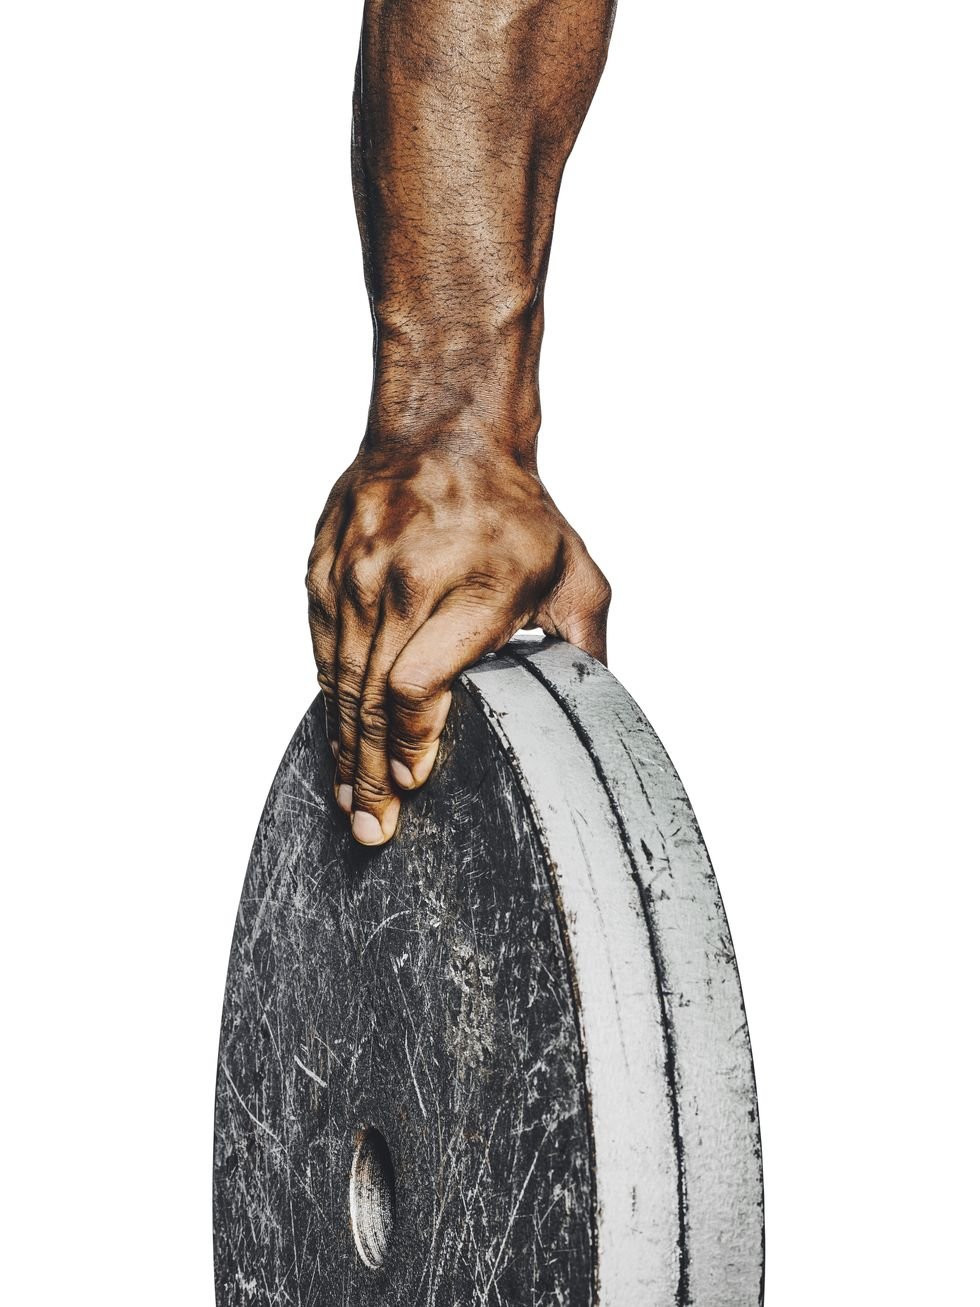 How You Can Score a Grip for Stronger Forearms